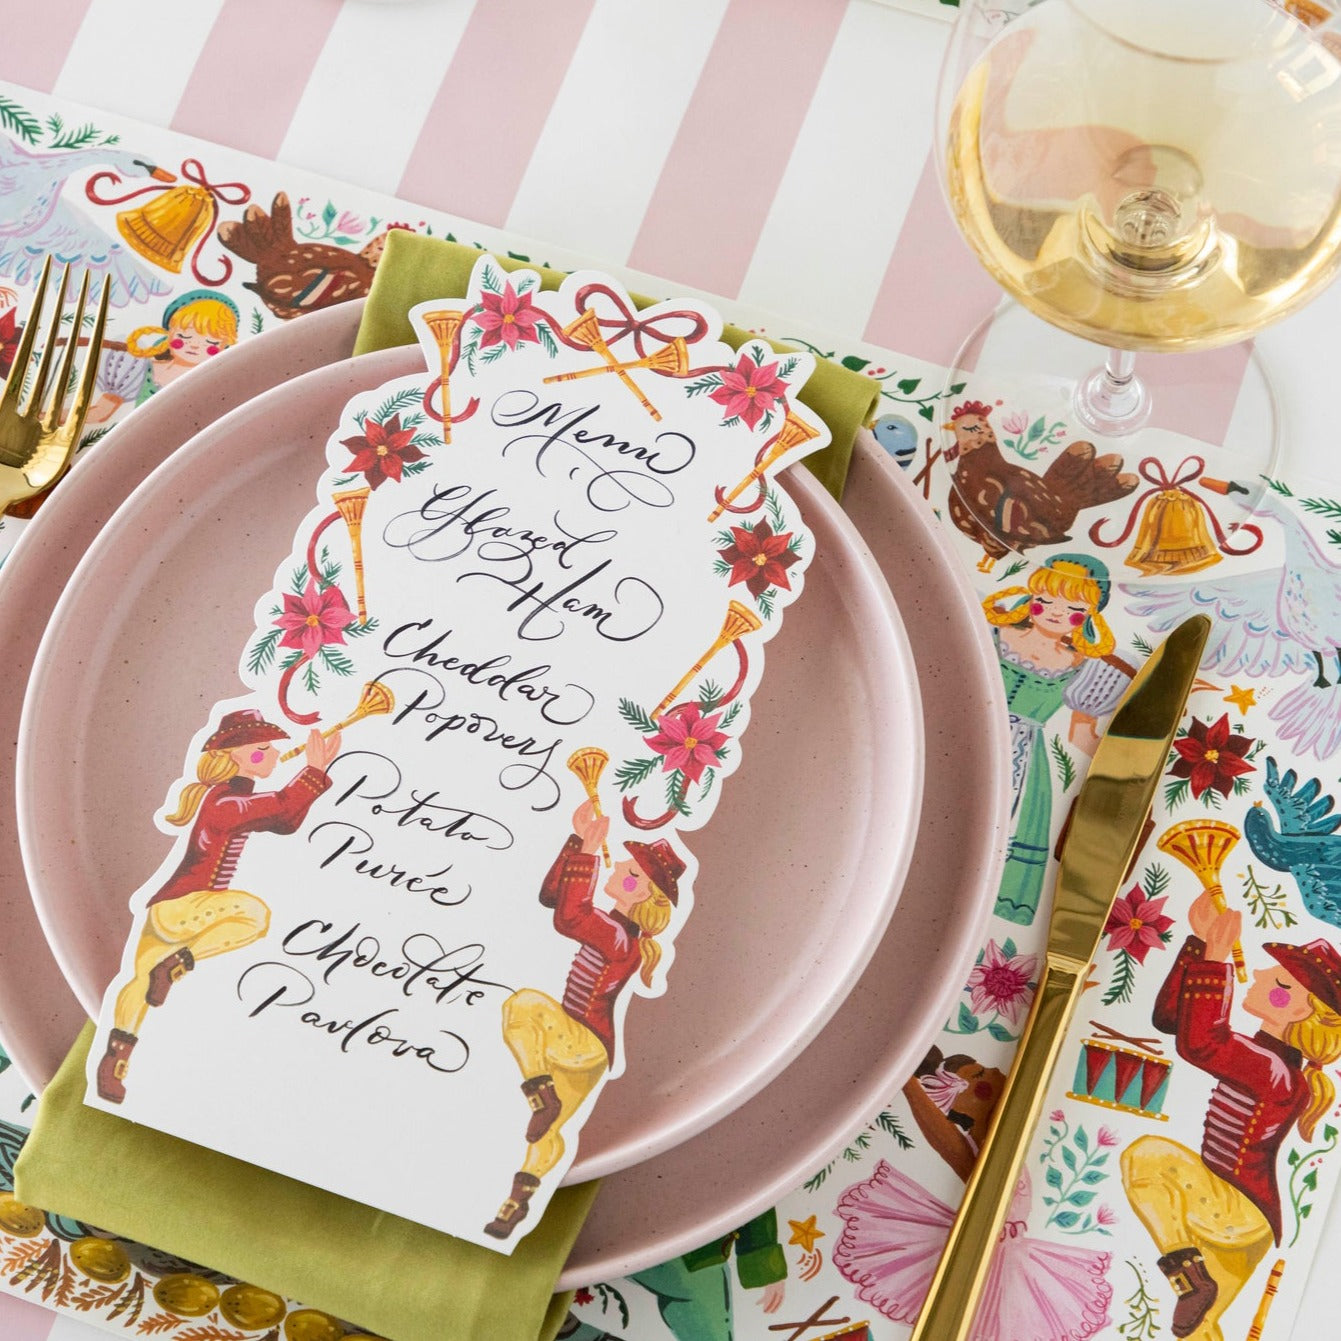 A Pipers Piping Table card with a menu written on it resting on the plate of a holiday place setting.